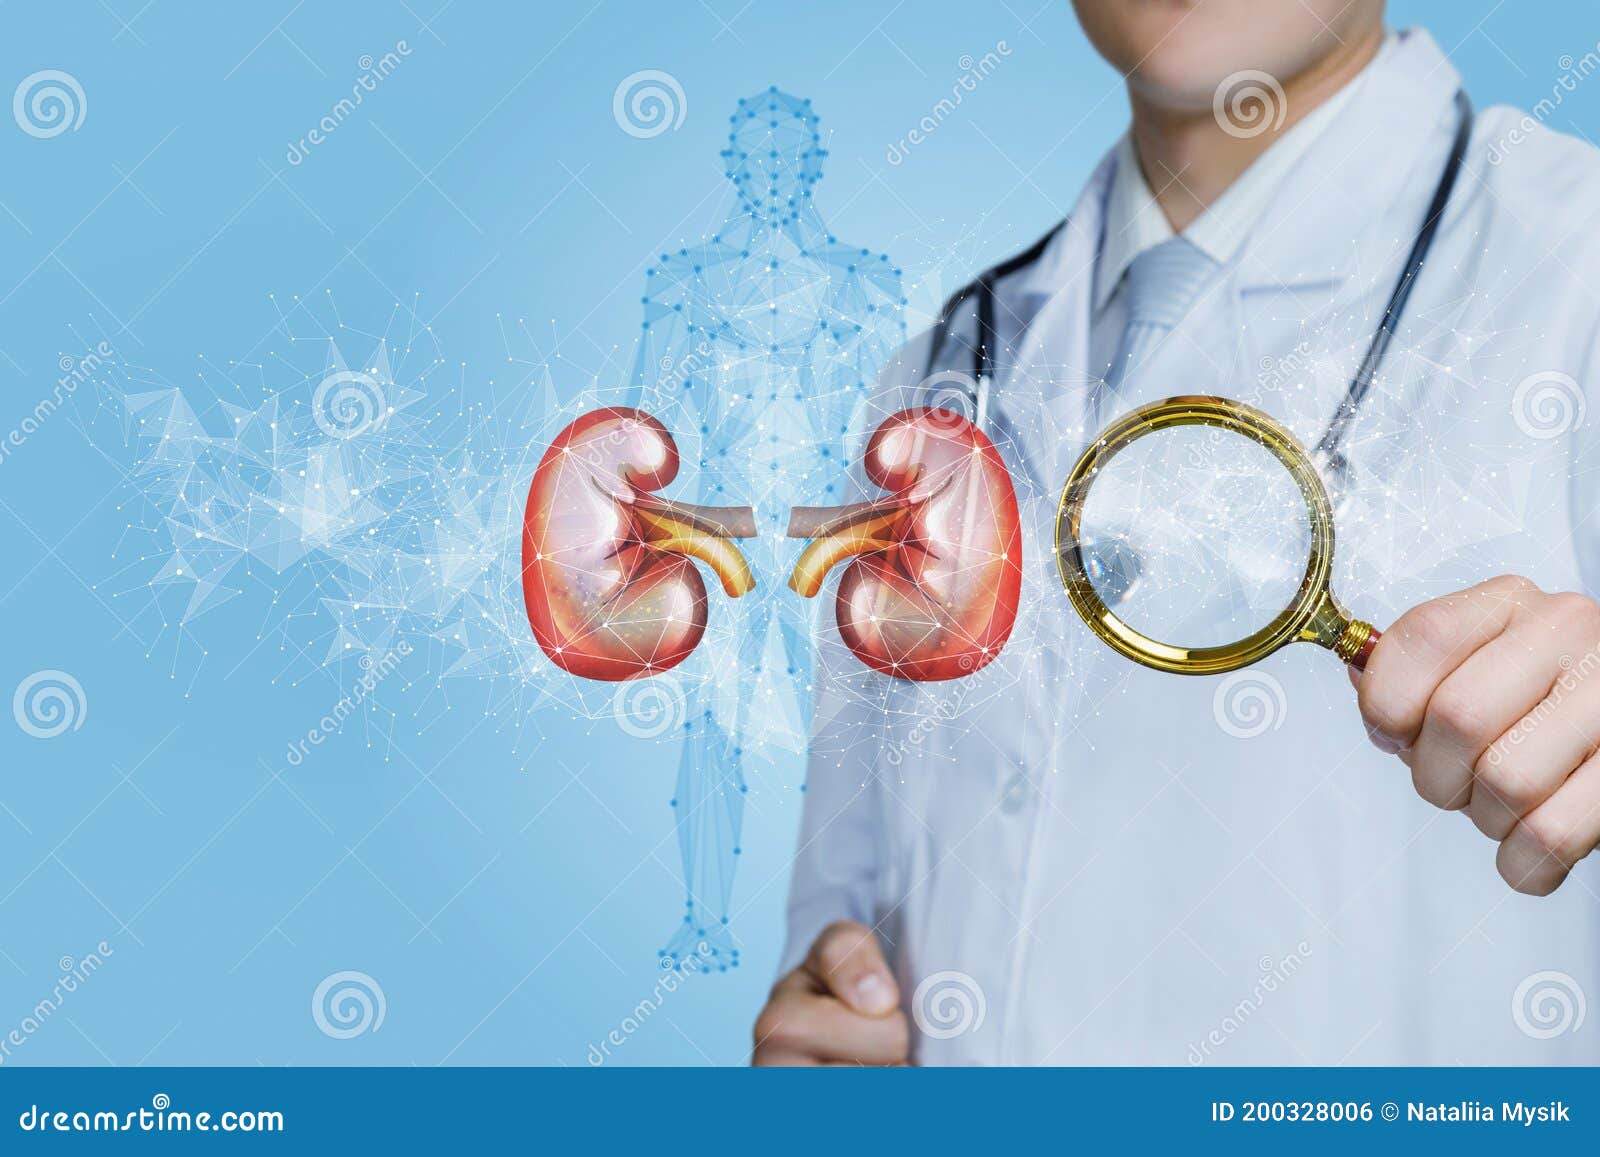 concept of diagnosis and treatment of kidney disease